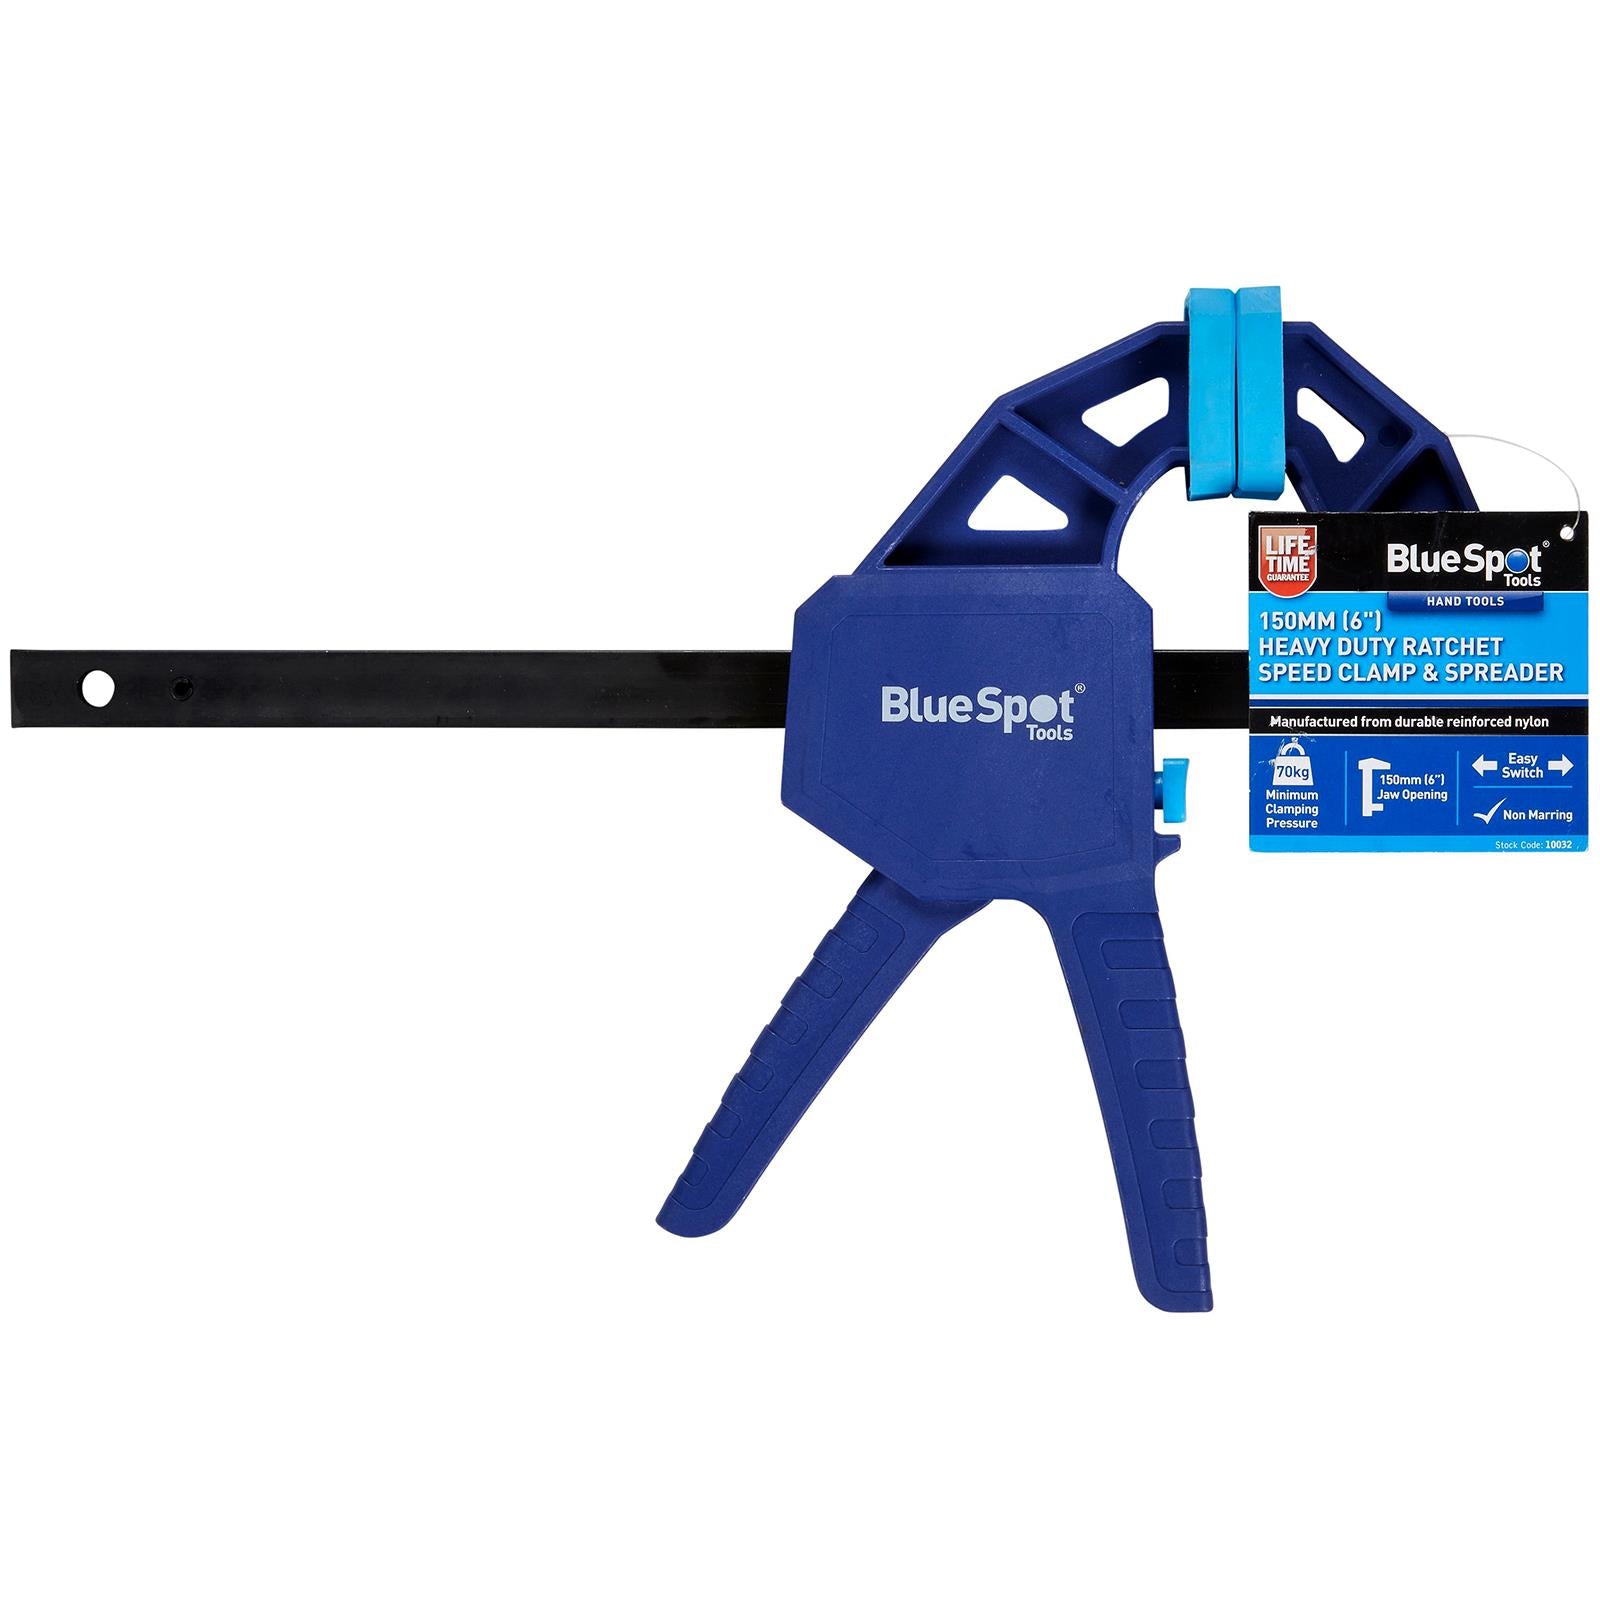 BlueSpot Heavy Duty Ratchet Speed Clamp and Spreader 150mm (6")